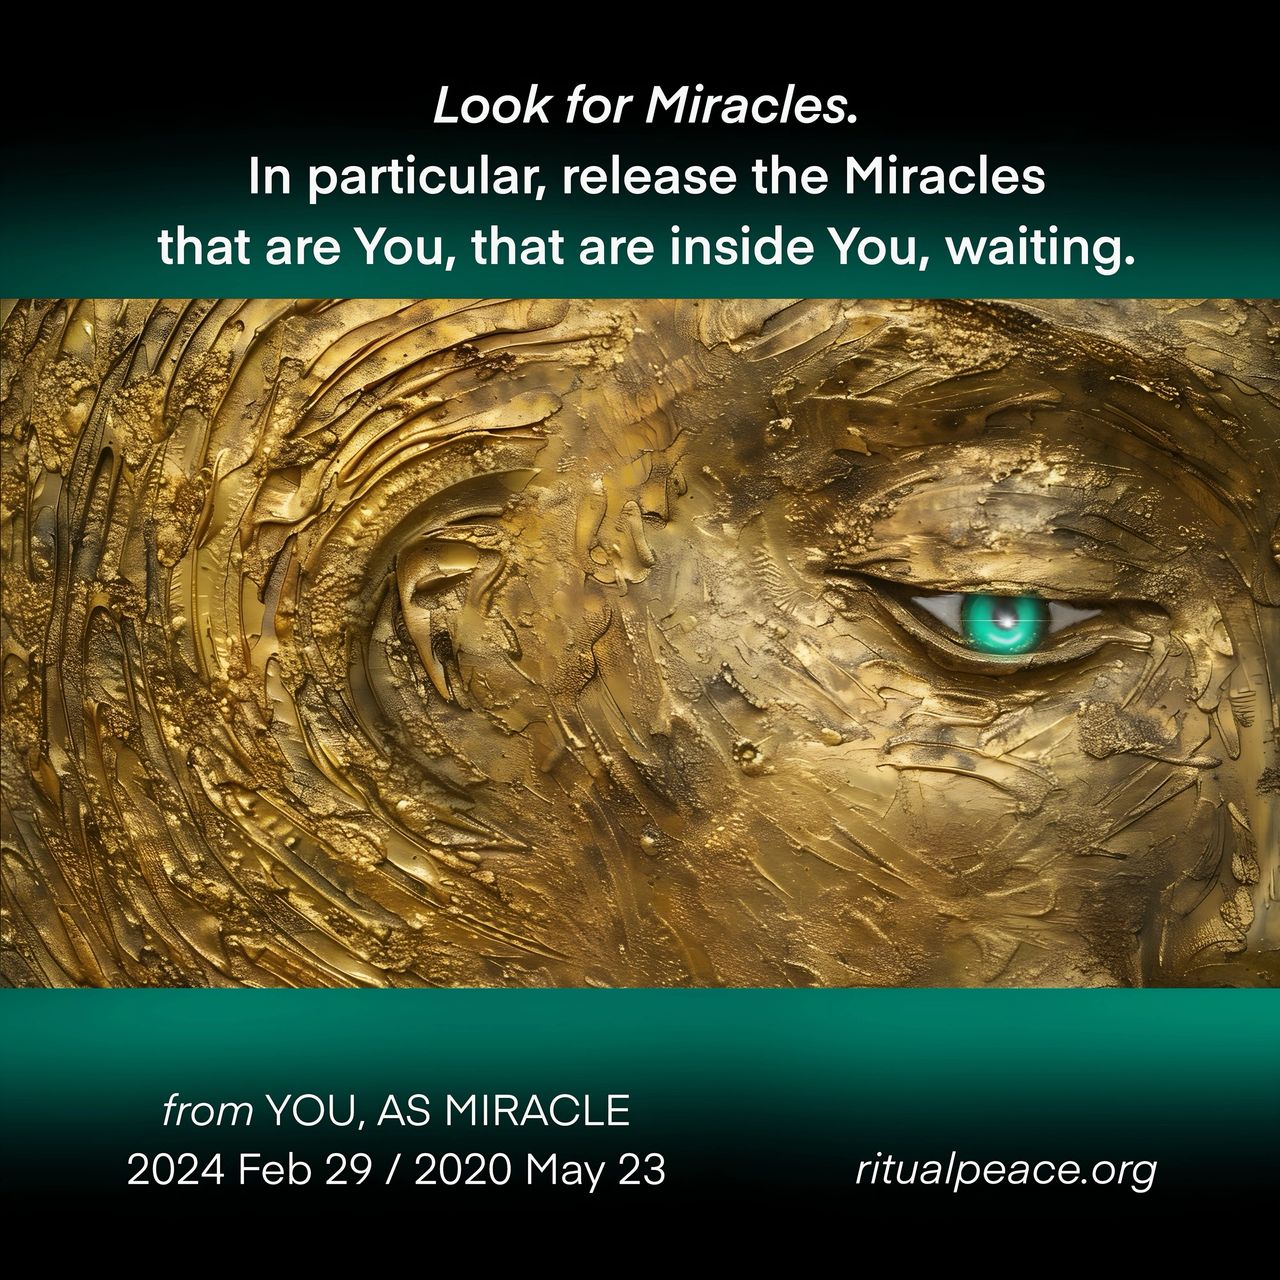 RELEASE THE MIRACLES INSIDE YOU, RITUAL PEACE, GREEN, GOLD